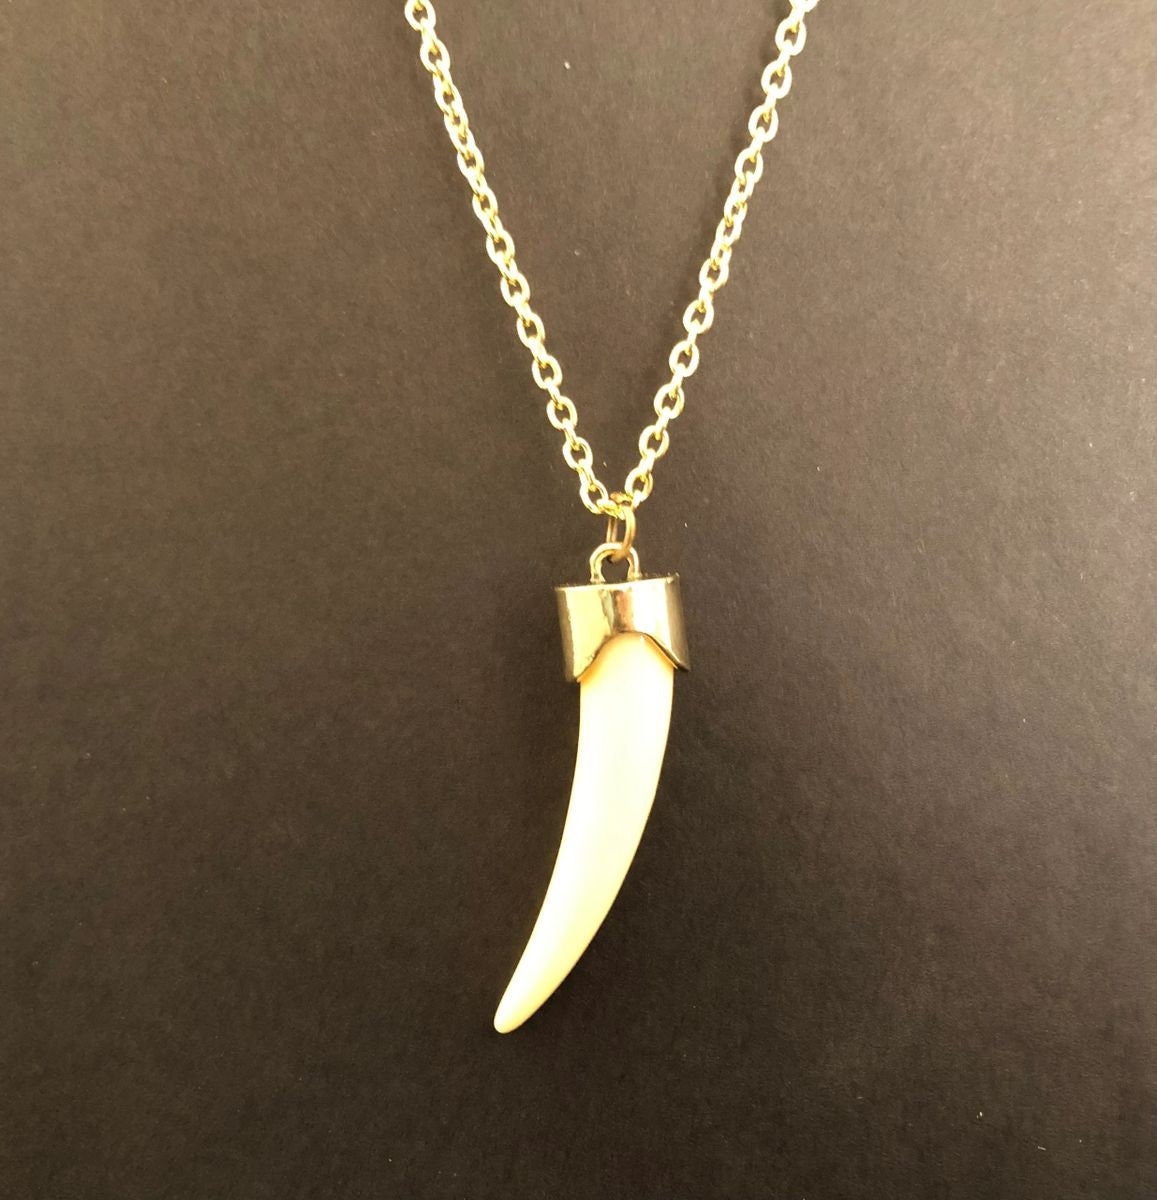 Buy Saber Toothed Tiger Necklace, LARGE Saber Tooth Jewelry, BIG Sabre  Toothed Cat Pendant, Boyfriend Gift, Boyfriend Necklace Saber Tooth Skull  Online in India - Etsy